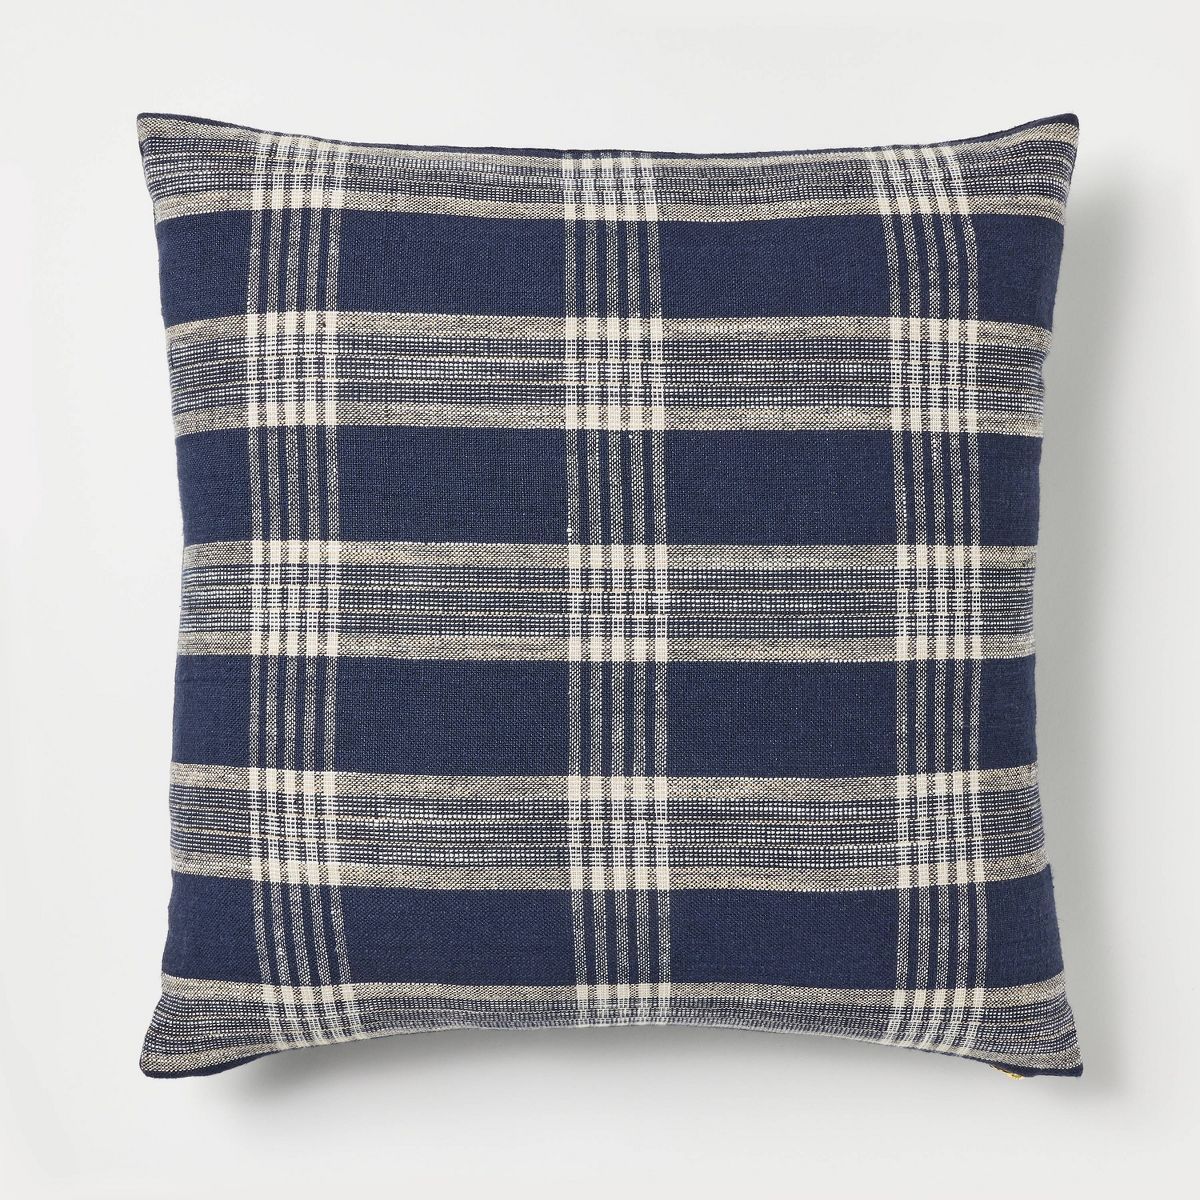 Woven Plaid Square Throw Pillow with Zipper Pull Navy Blue - Threshold™ designed with Studio Mc... | Target